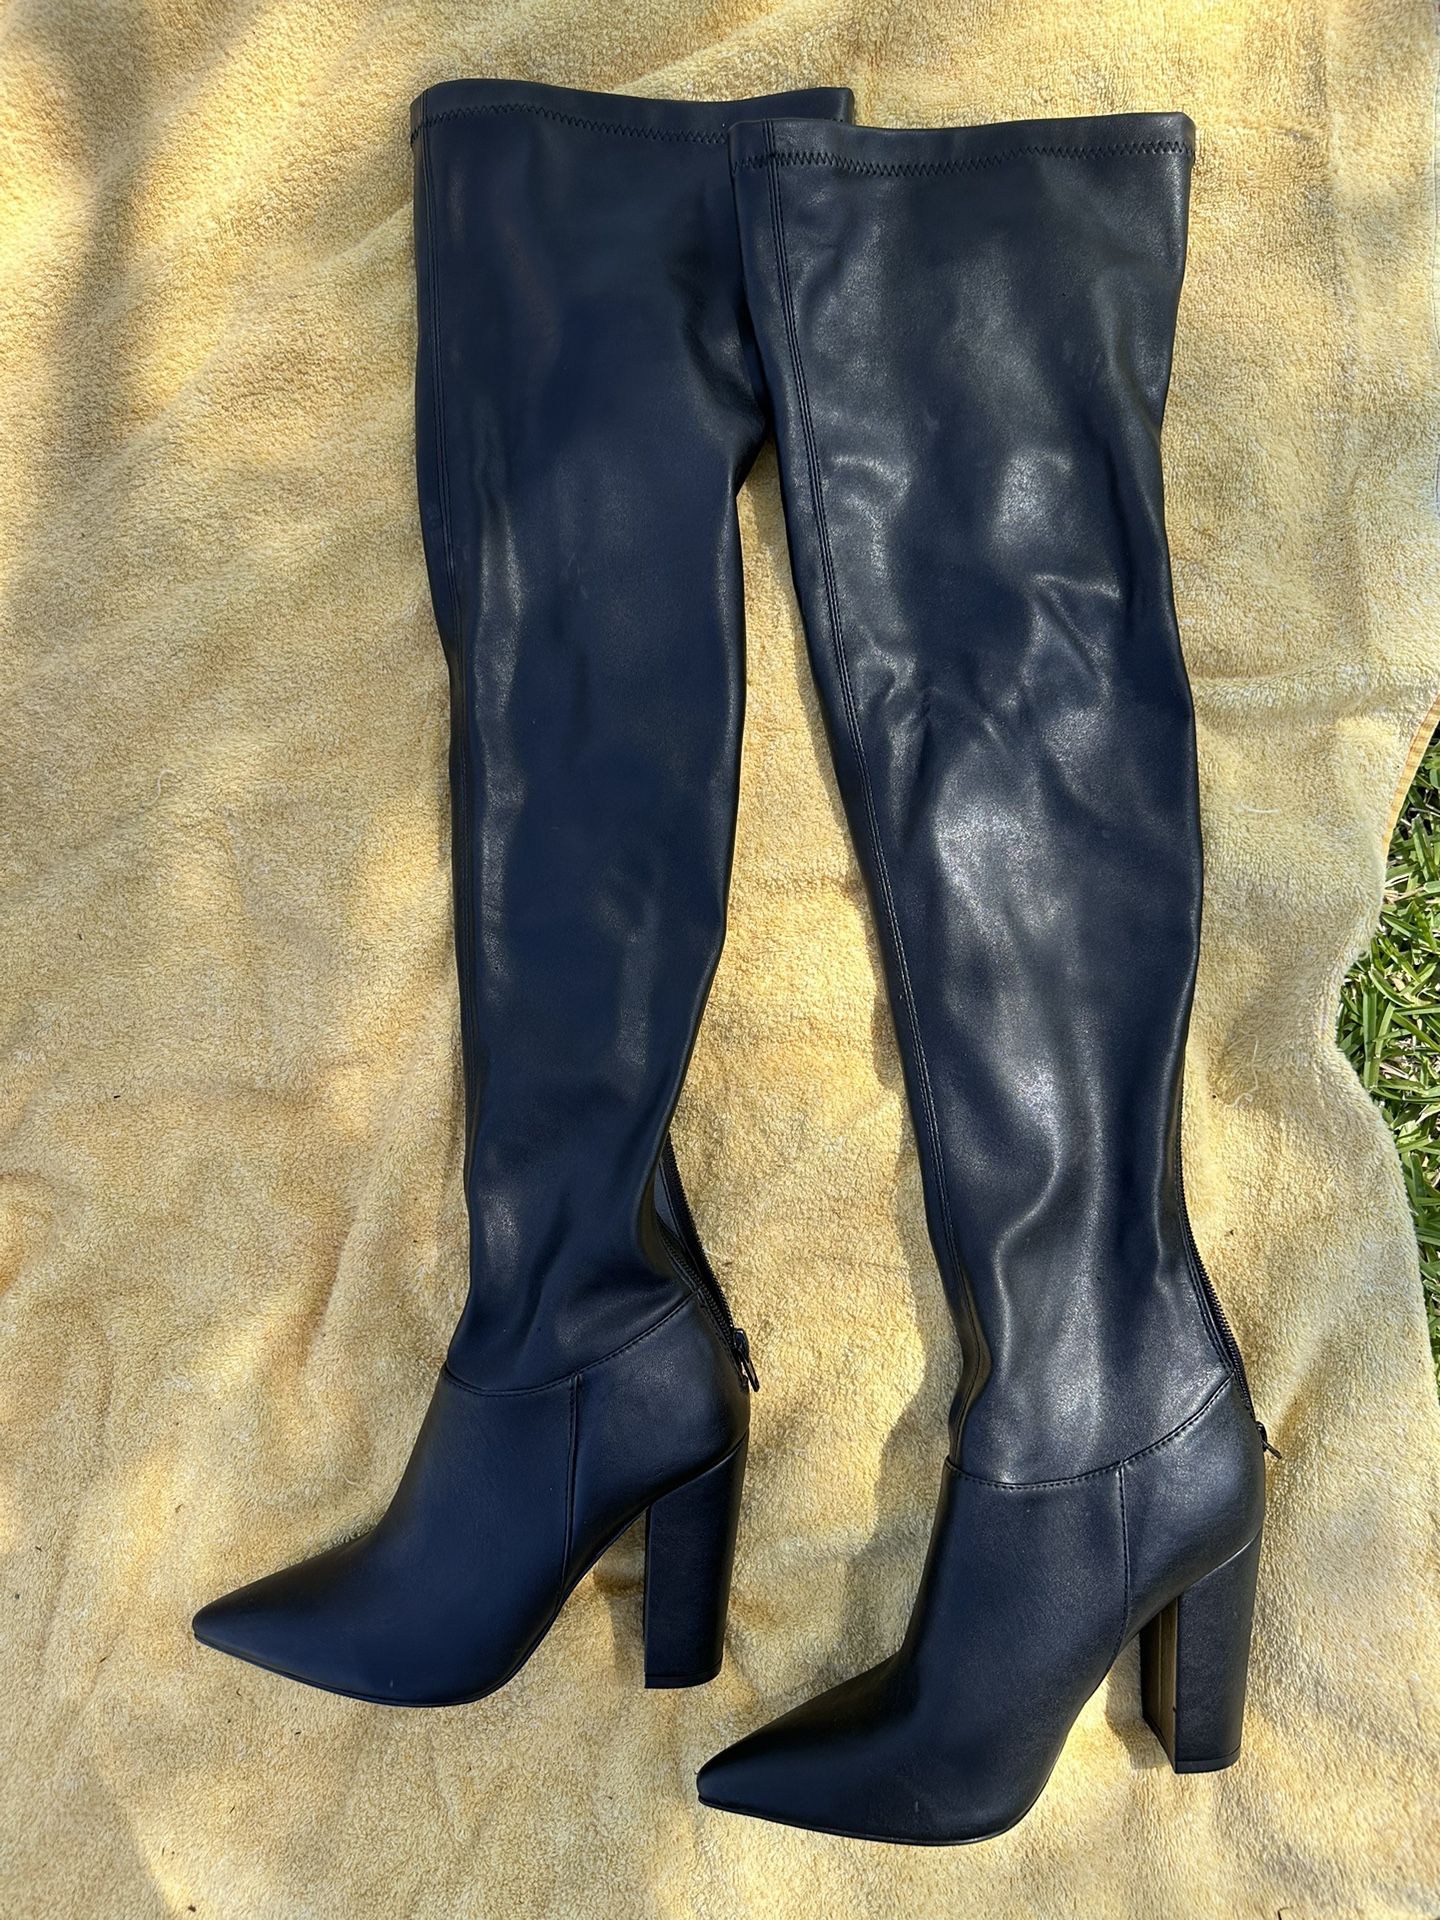 Woman’s “leather” Boots